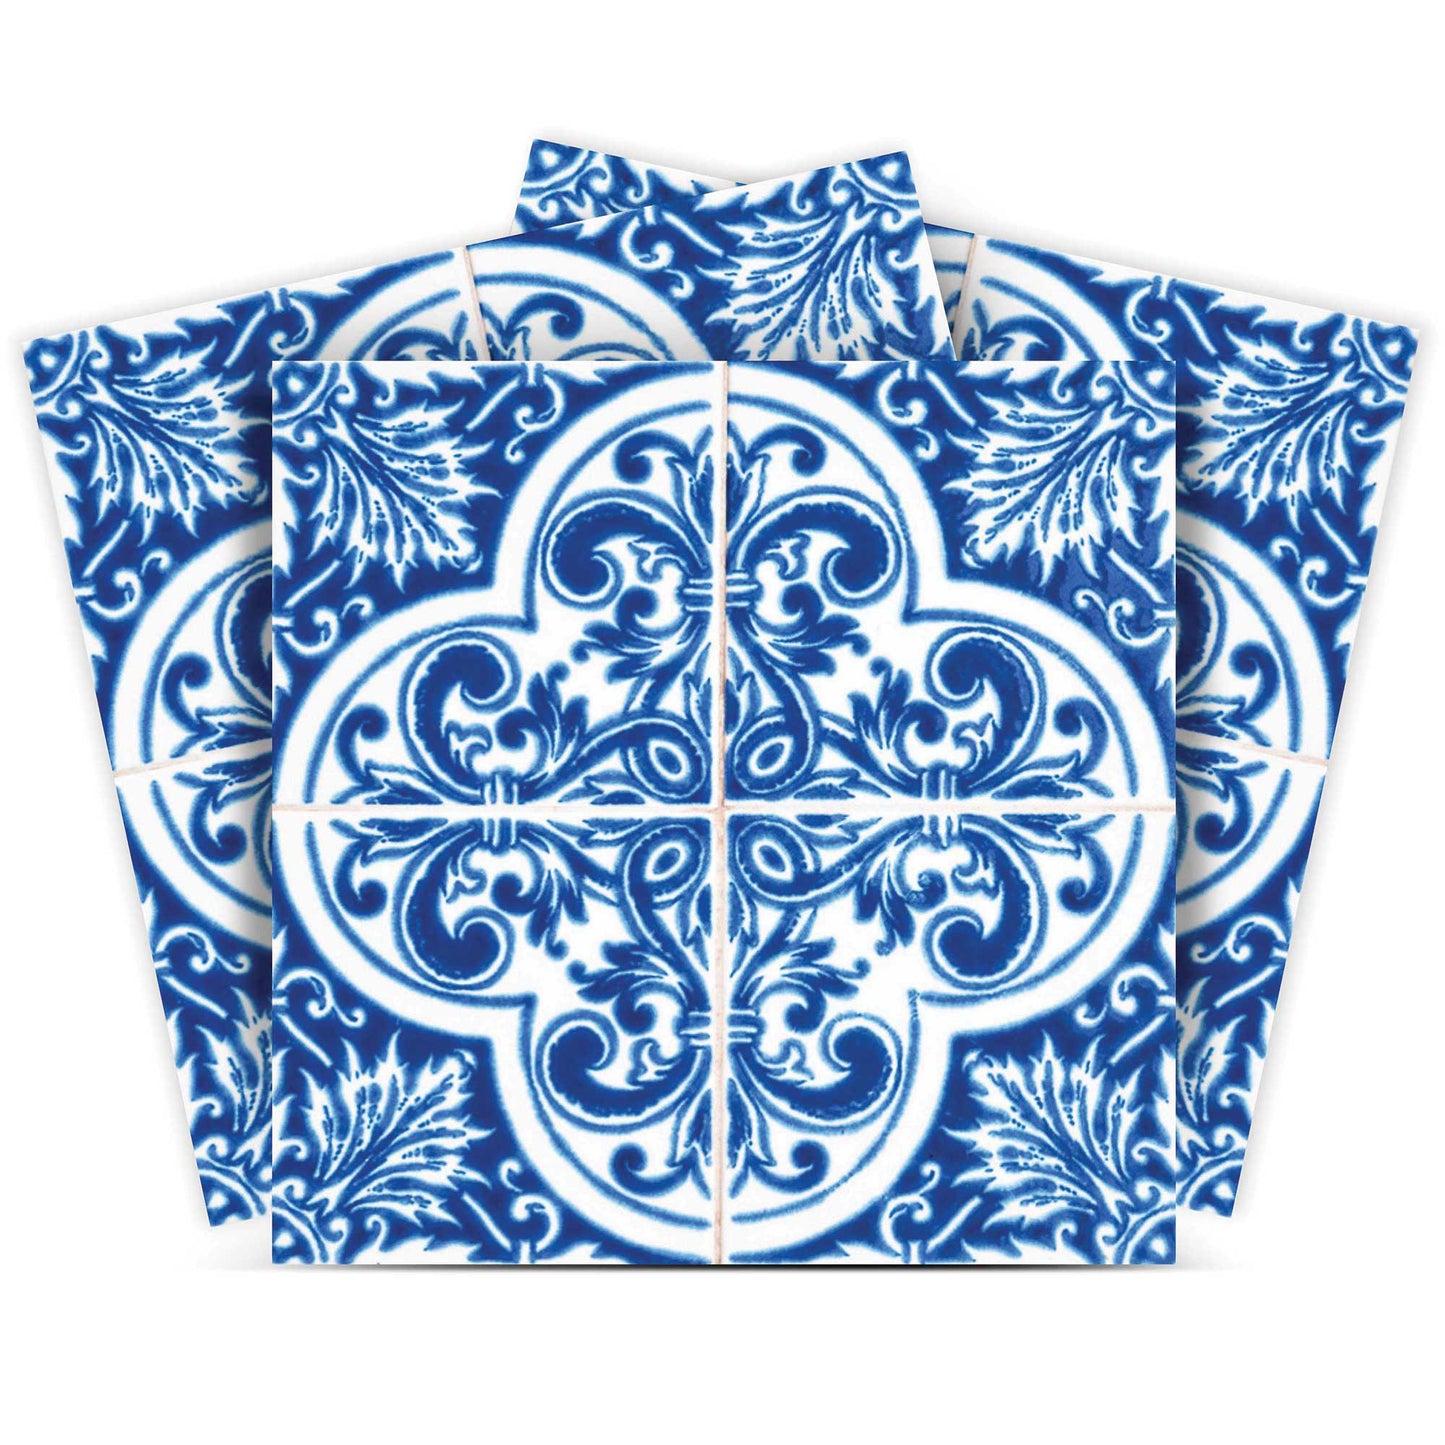 8" X 8" Blue and White Cross Peel And Stick Tiles